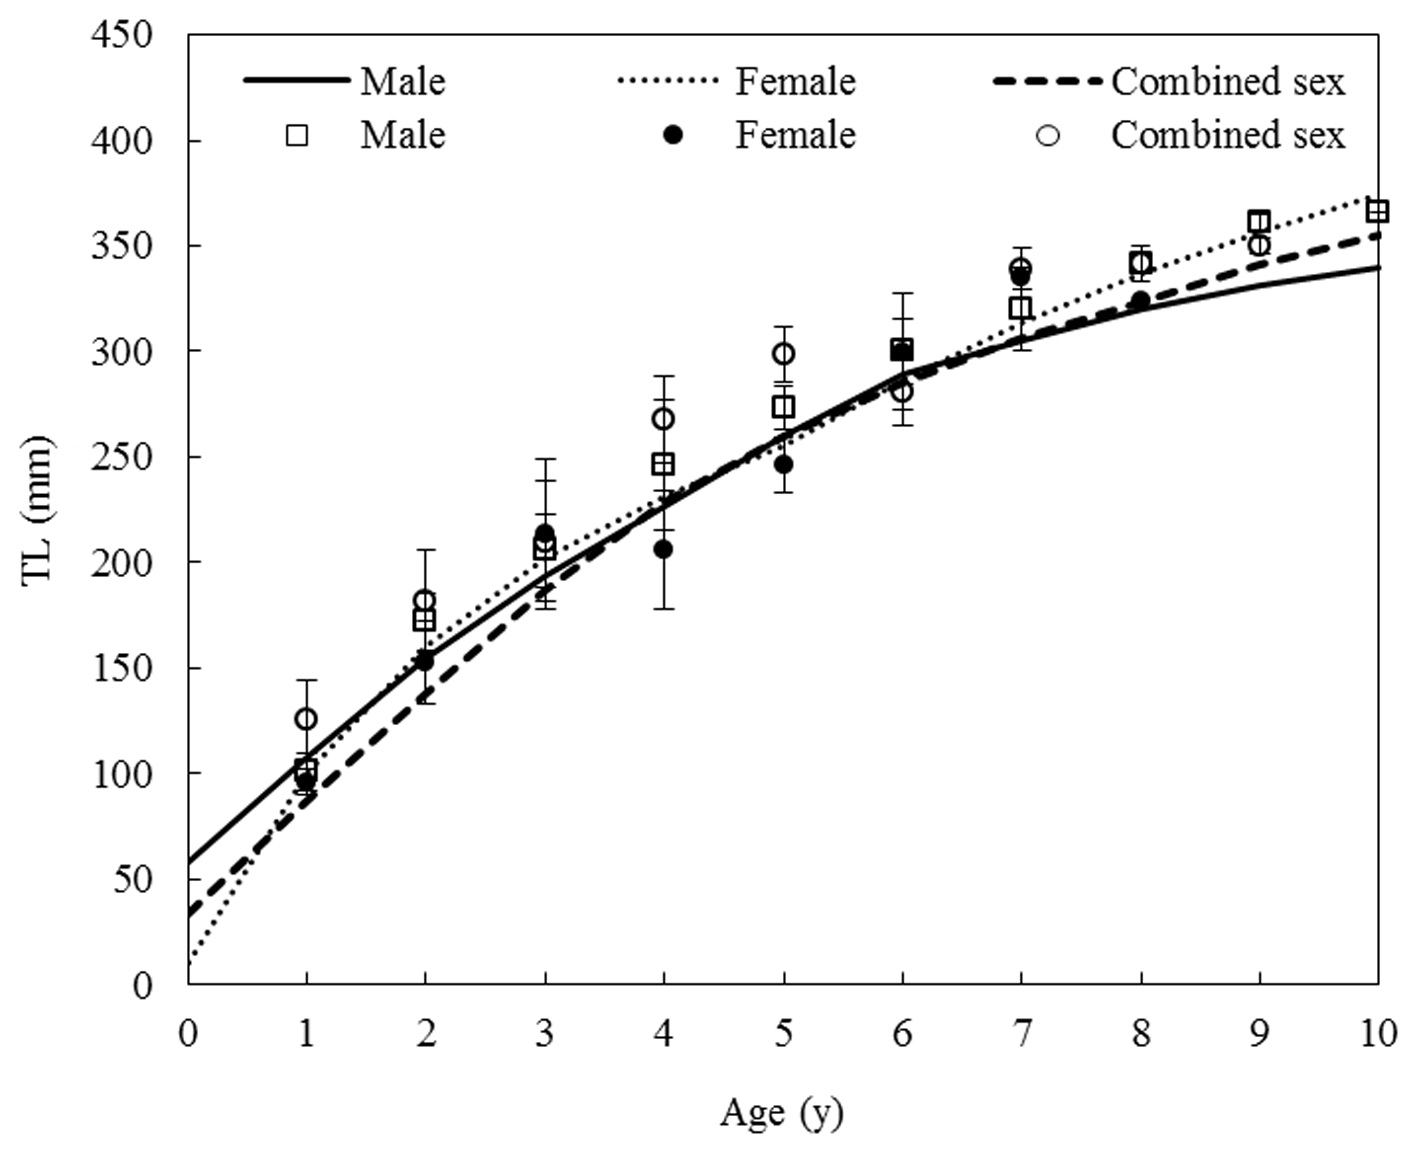 The von Bertalanffy growth curves estimated by vertebra reading of Hemibabus labeo for male, female and combined sex. TL, total length.